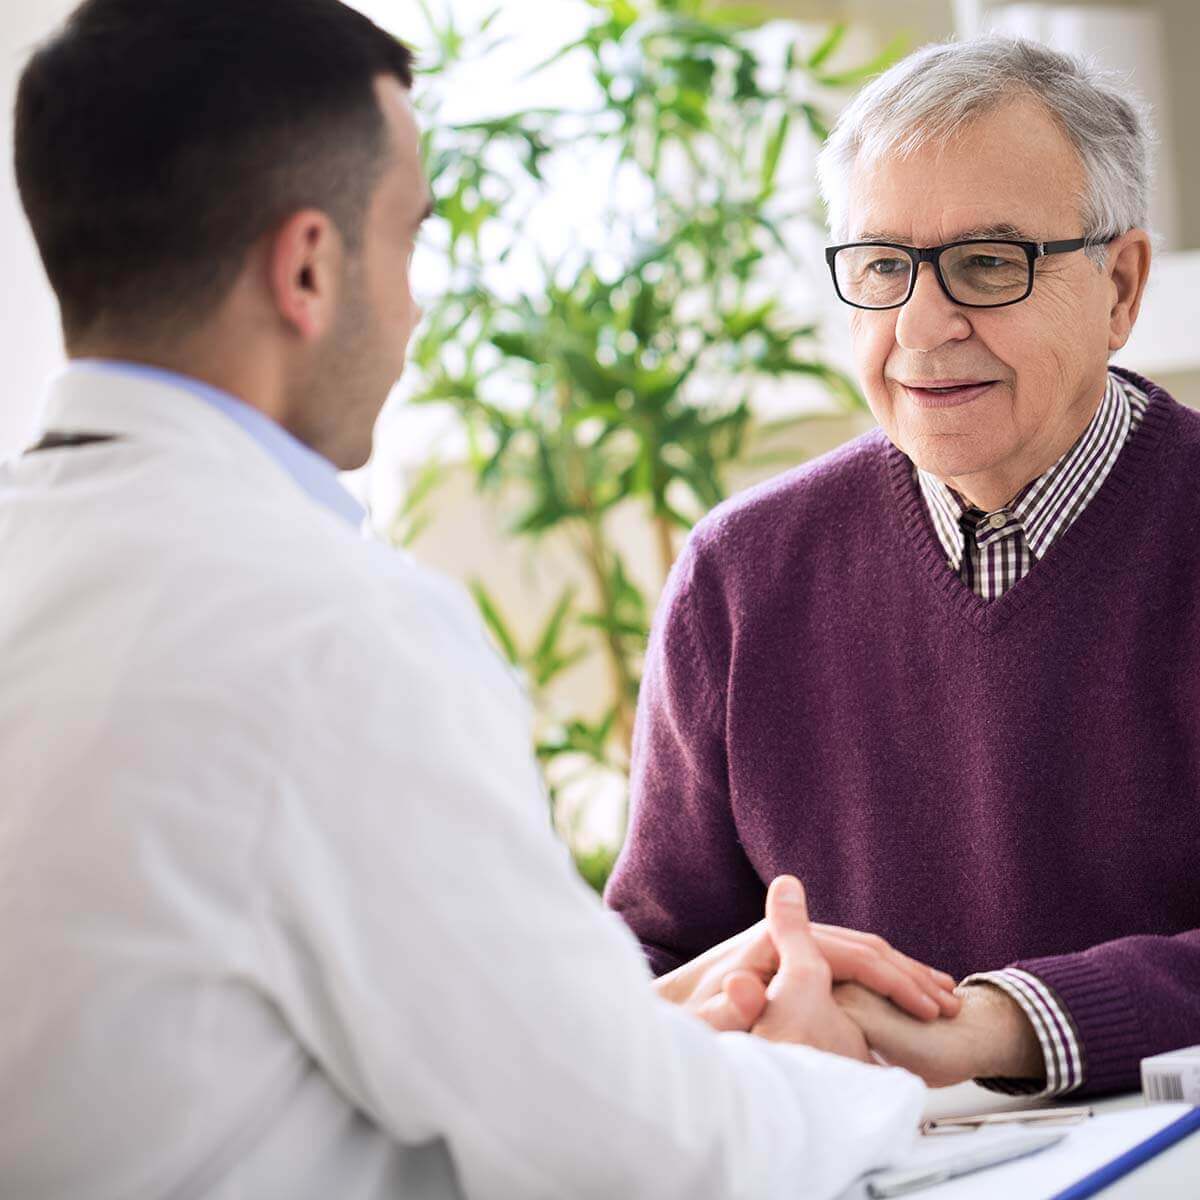 Home personalized care senior talking to doctor